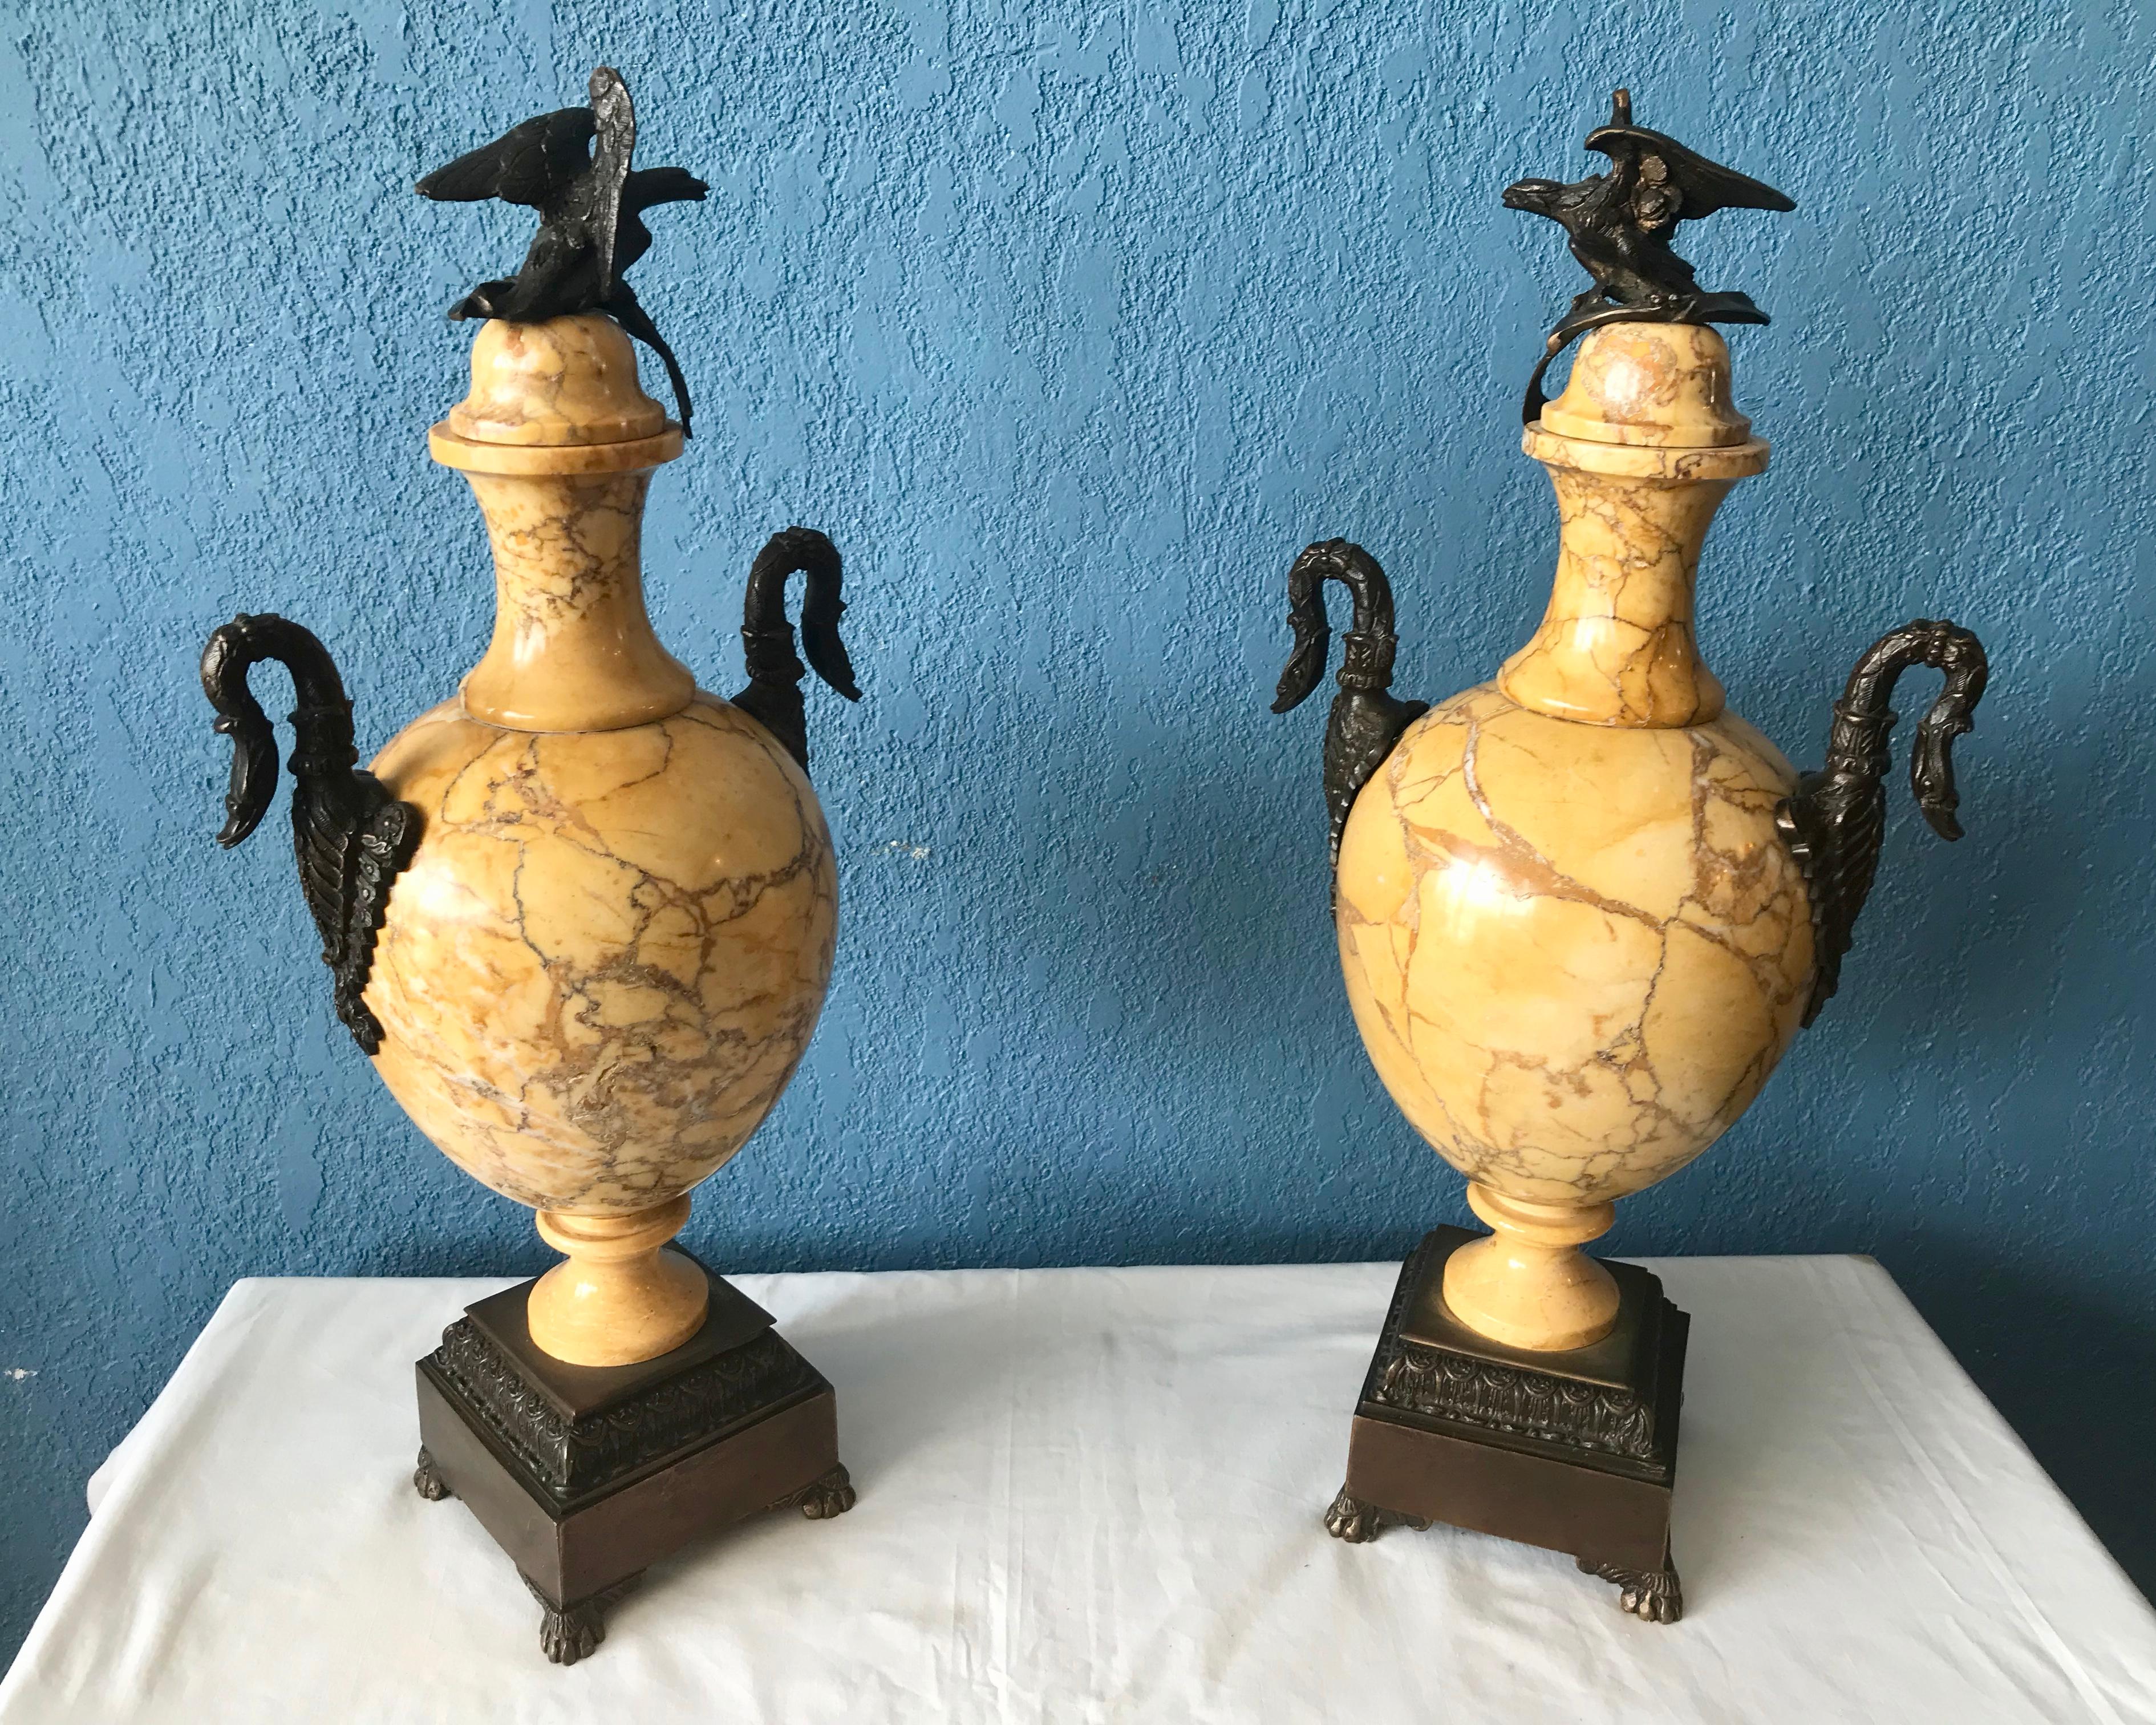 The impressive urns are appointed with swan motif handles and fitted with eagle finials.
They are raised upon bronze bases that terminate with paw feet.